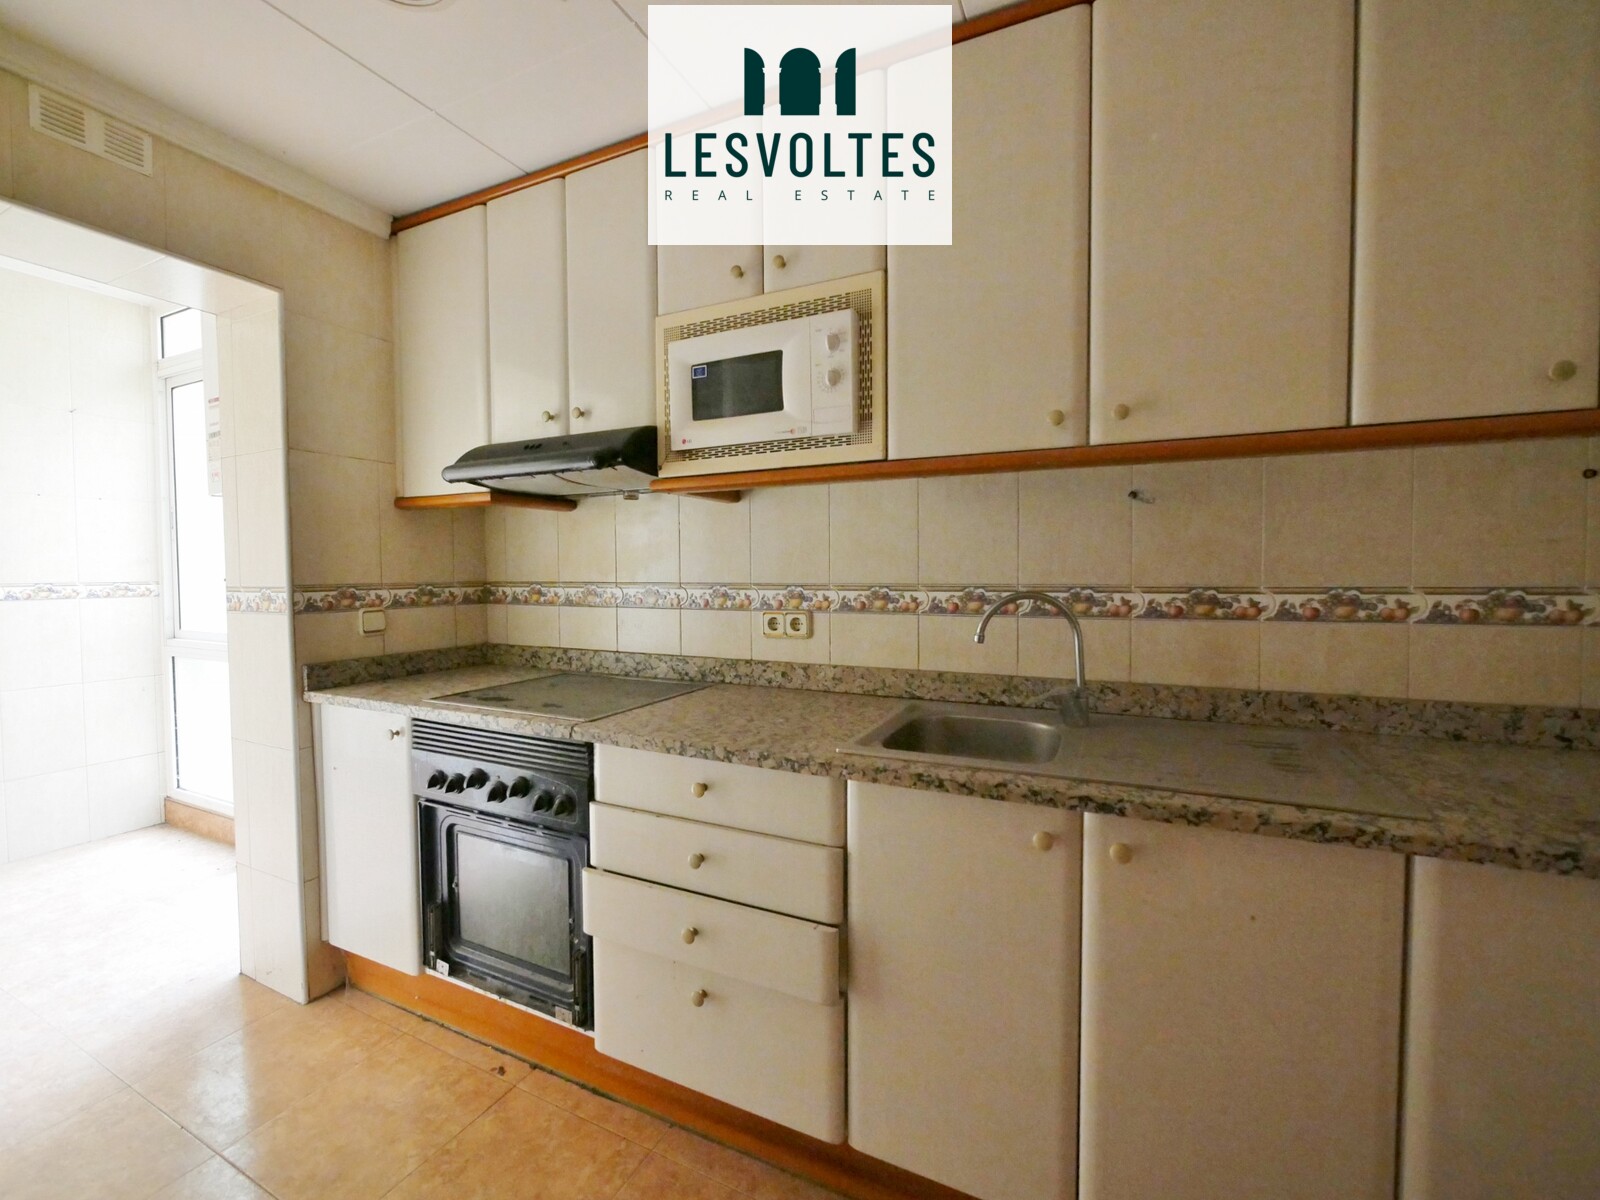  FLAT OF 70 M2 IN SECOND FLOOR WITH 2 BEDROOMS FOR SALE IN ULLÀ.